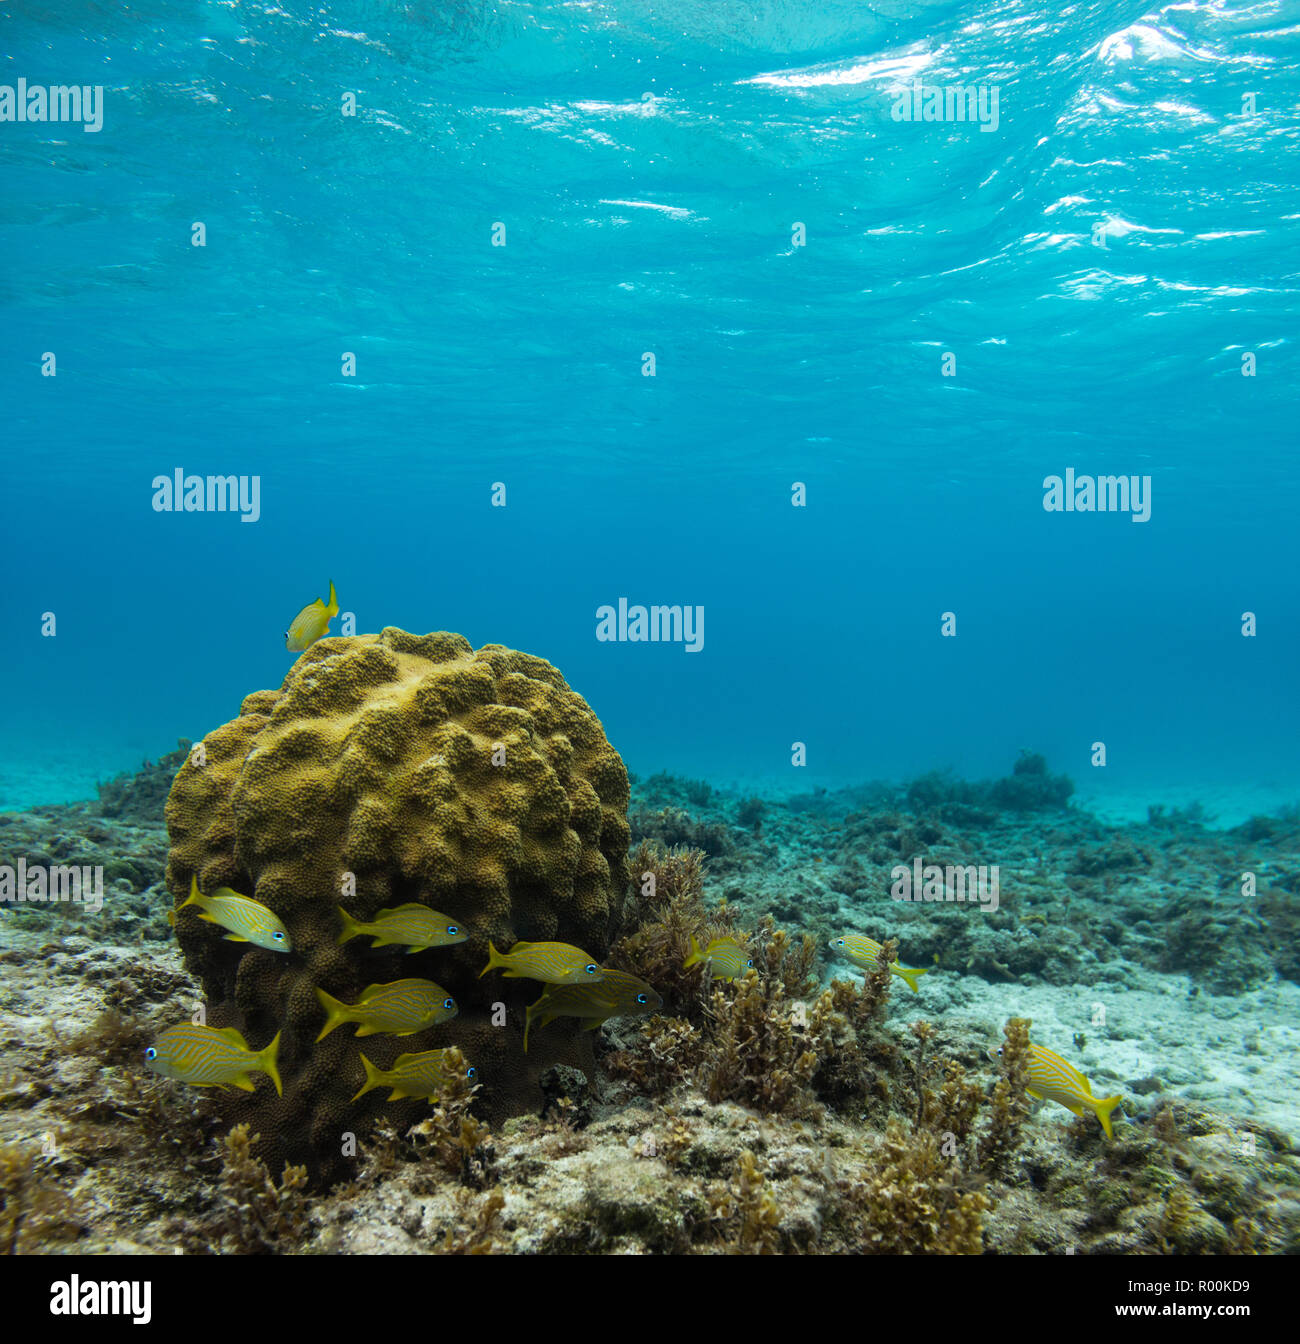 Sea Sponge Surrounded by fish. Stock Photo